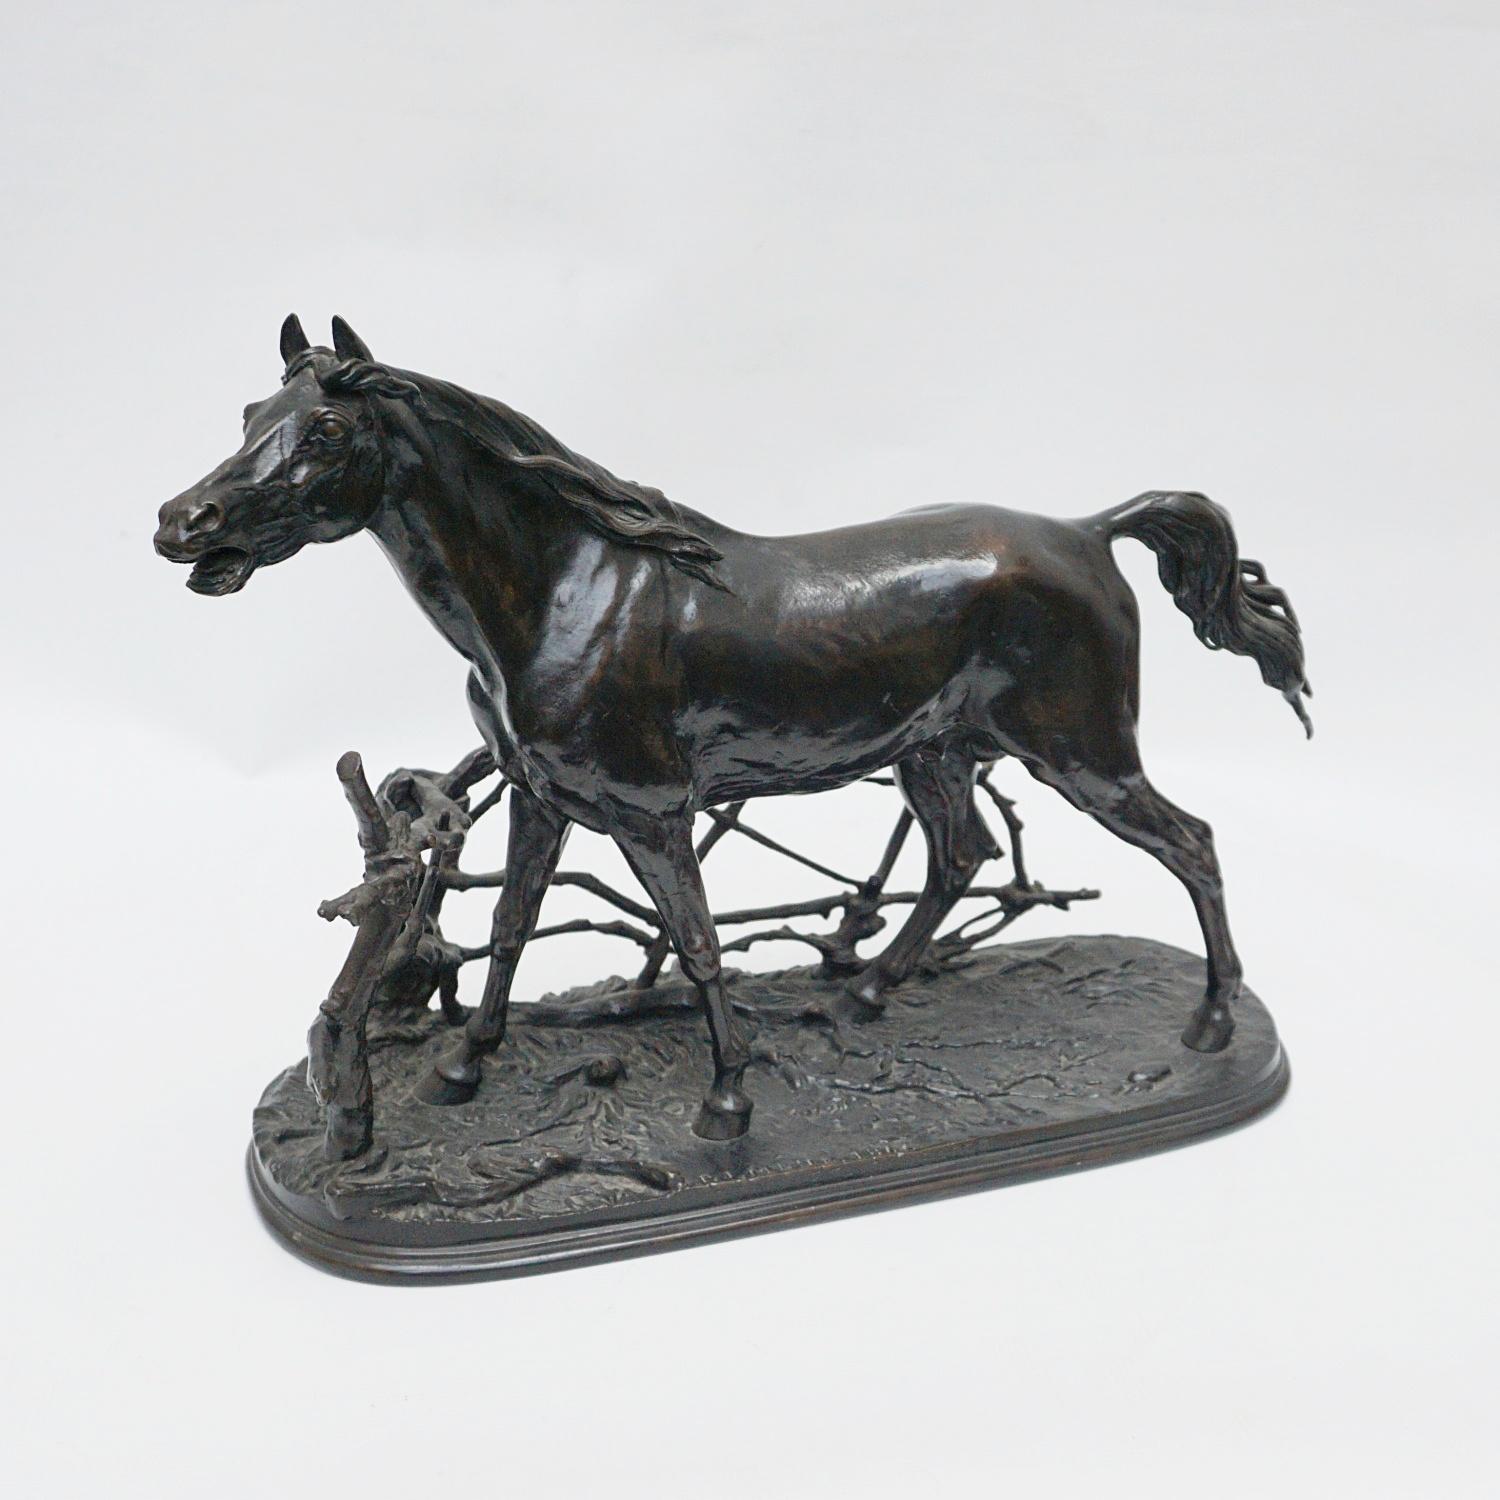 'Djinn Etalon Arabe', a patinated bronze study of a horse standing by a rustic fence. Set over an integral base with engraved detail. Signed P J Mêne 1846 with title to side.

Pierre- Jules Mêne was born in 1810 and worked as a teenager for his